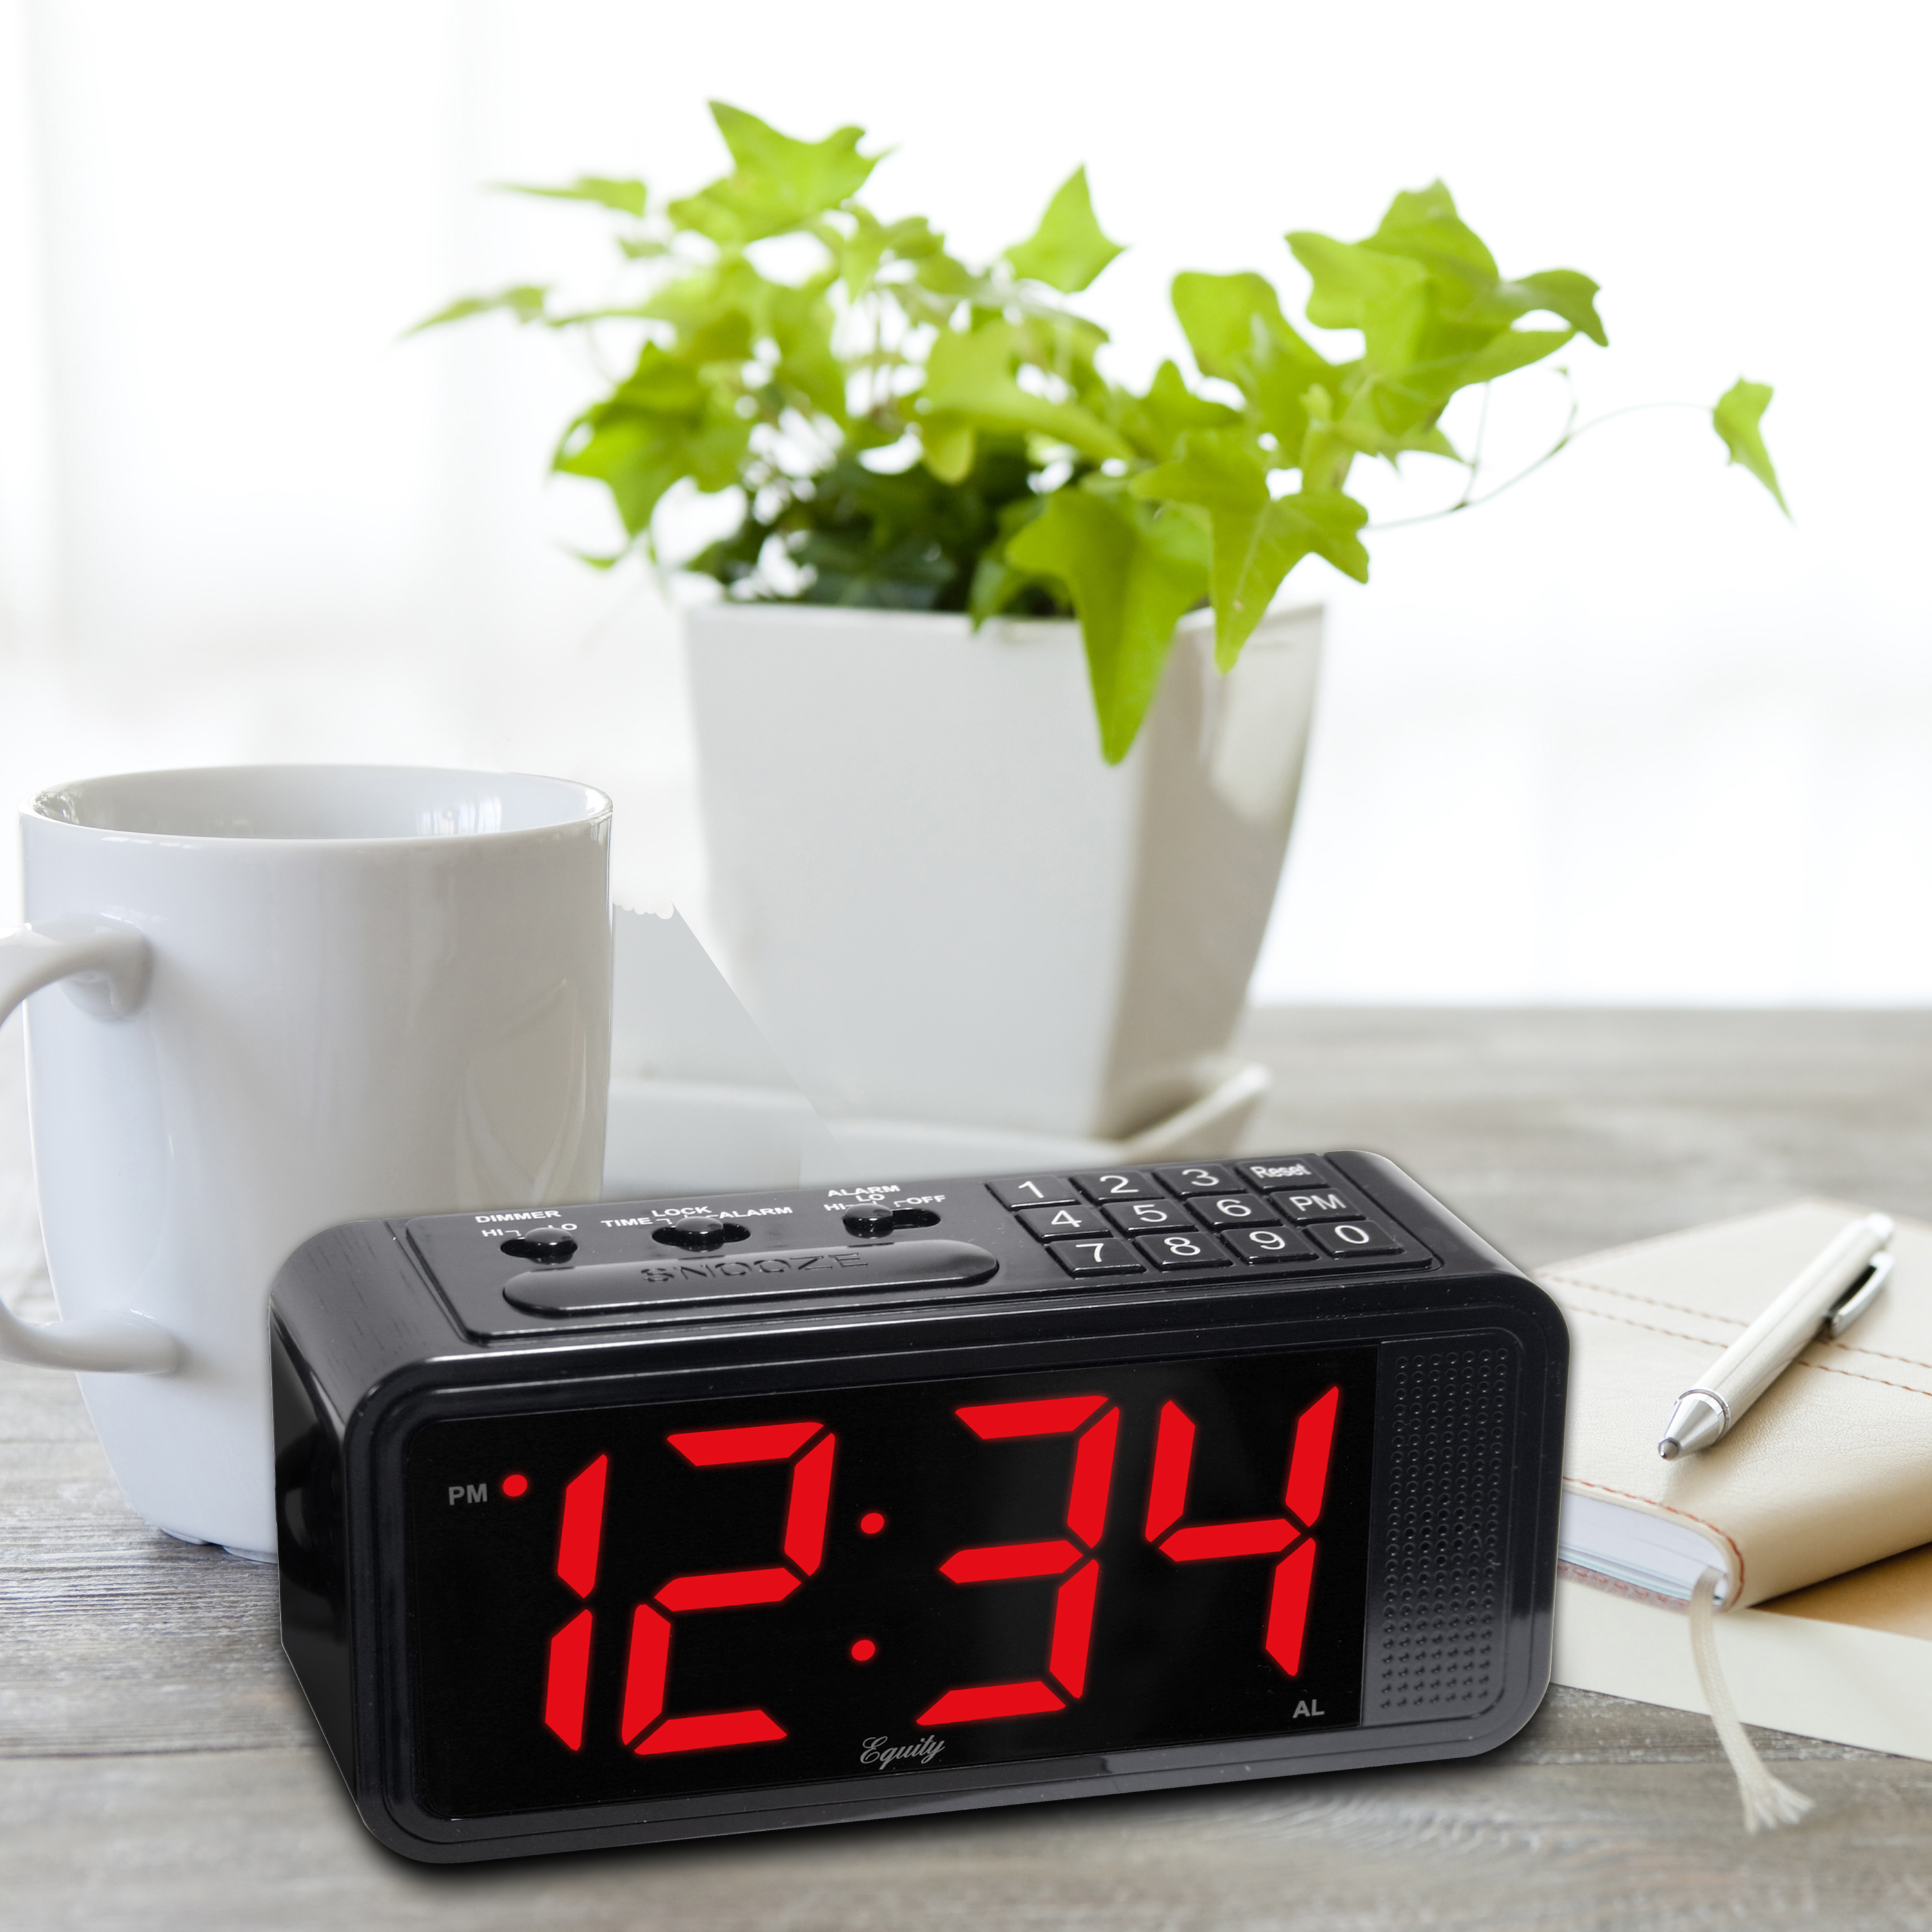 Equity by Lacrosse Quick-Set LED Alarm Clock, Black - image 1 of 2